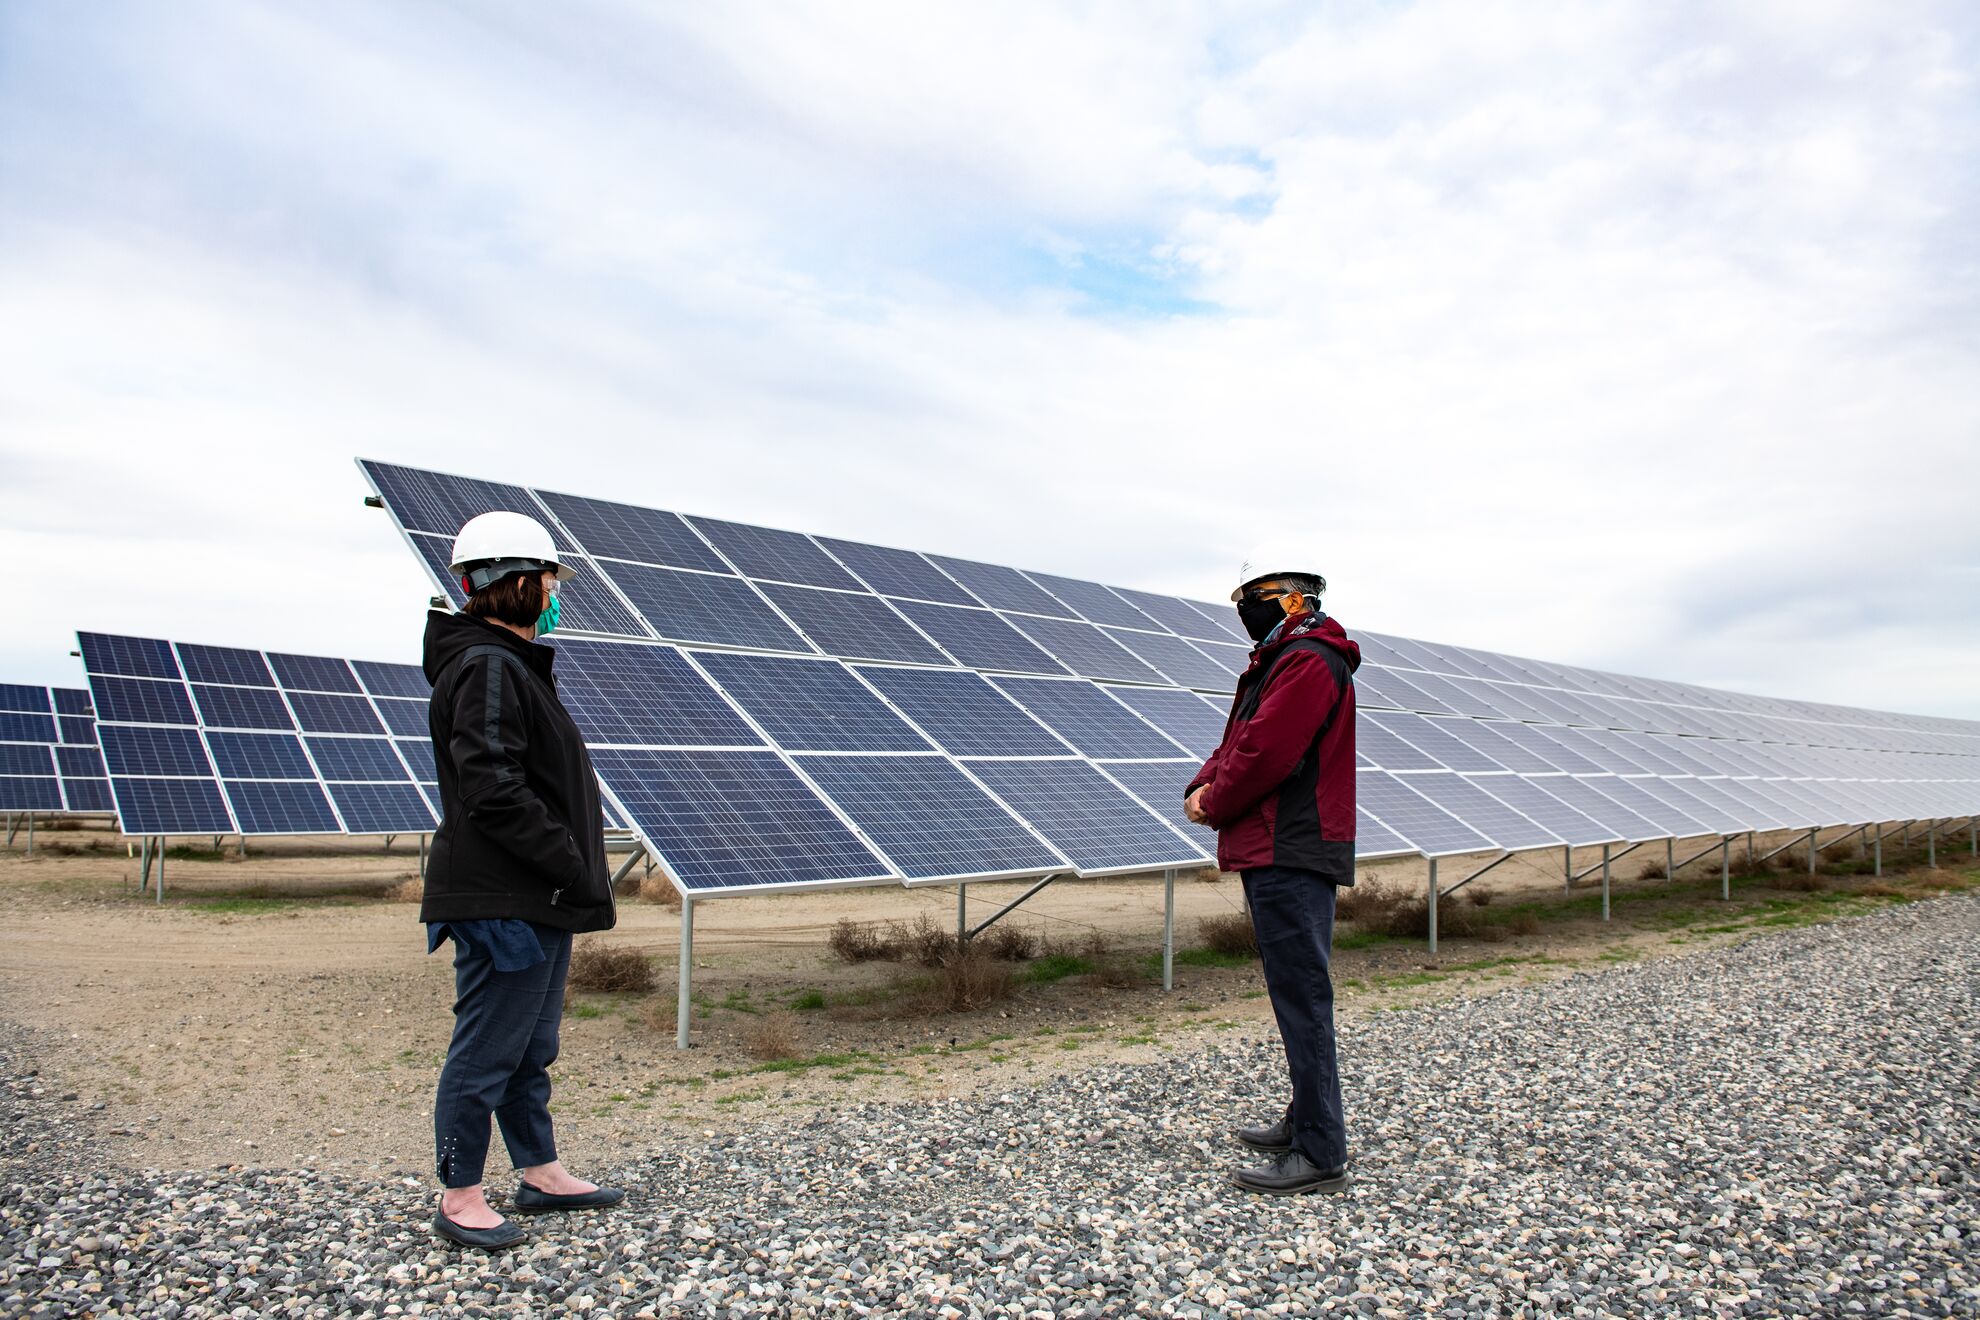 Solar panels sit in rows, facing skyward, as two staff members look over them